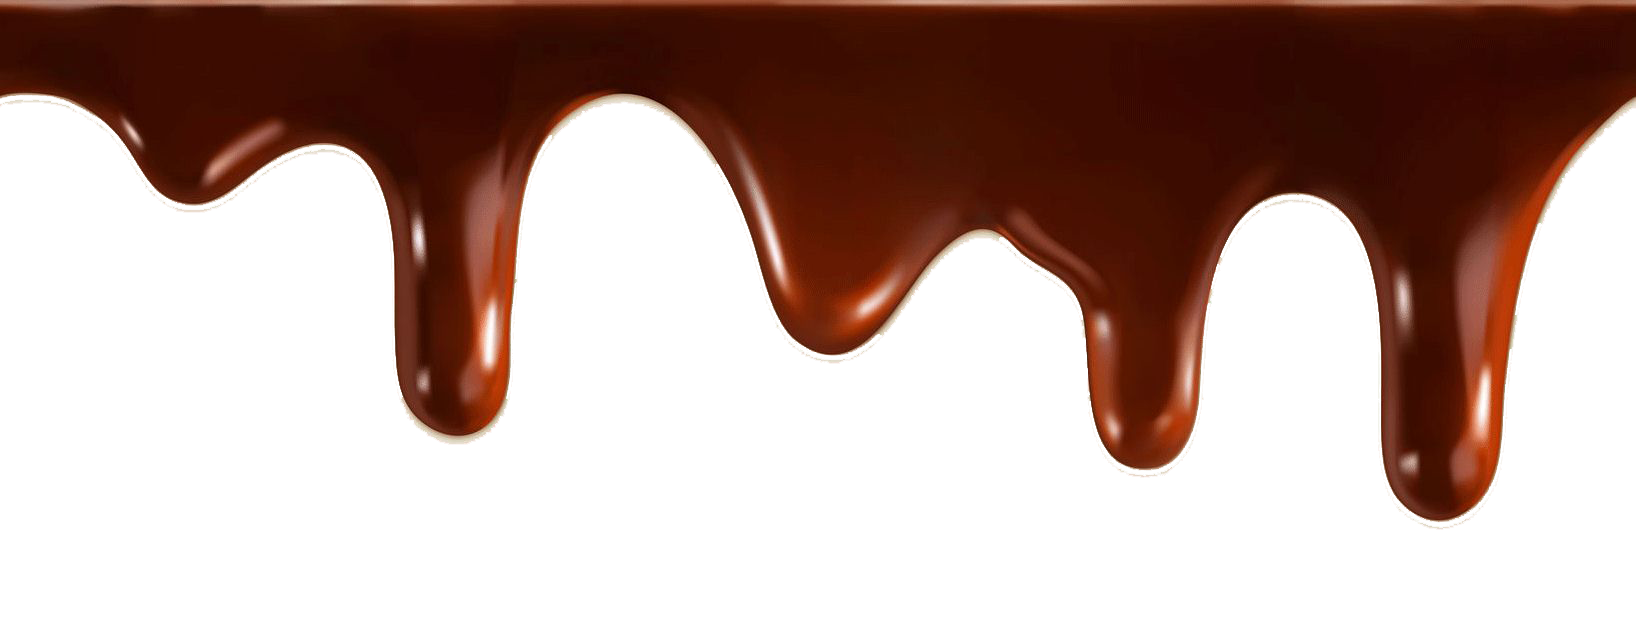 Melted Chocolate Png Transparent Image - Chocolate, Transparent background PNG HD thumbnail